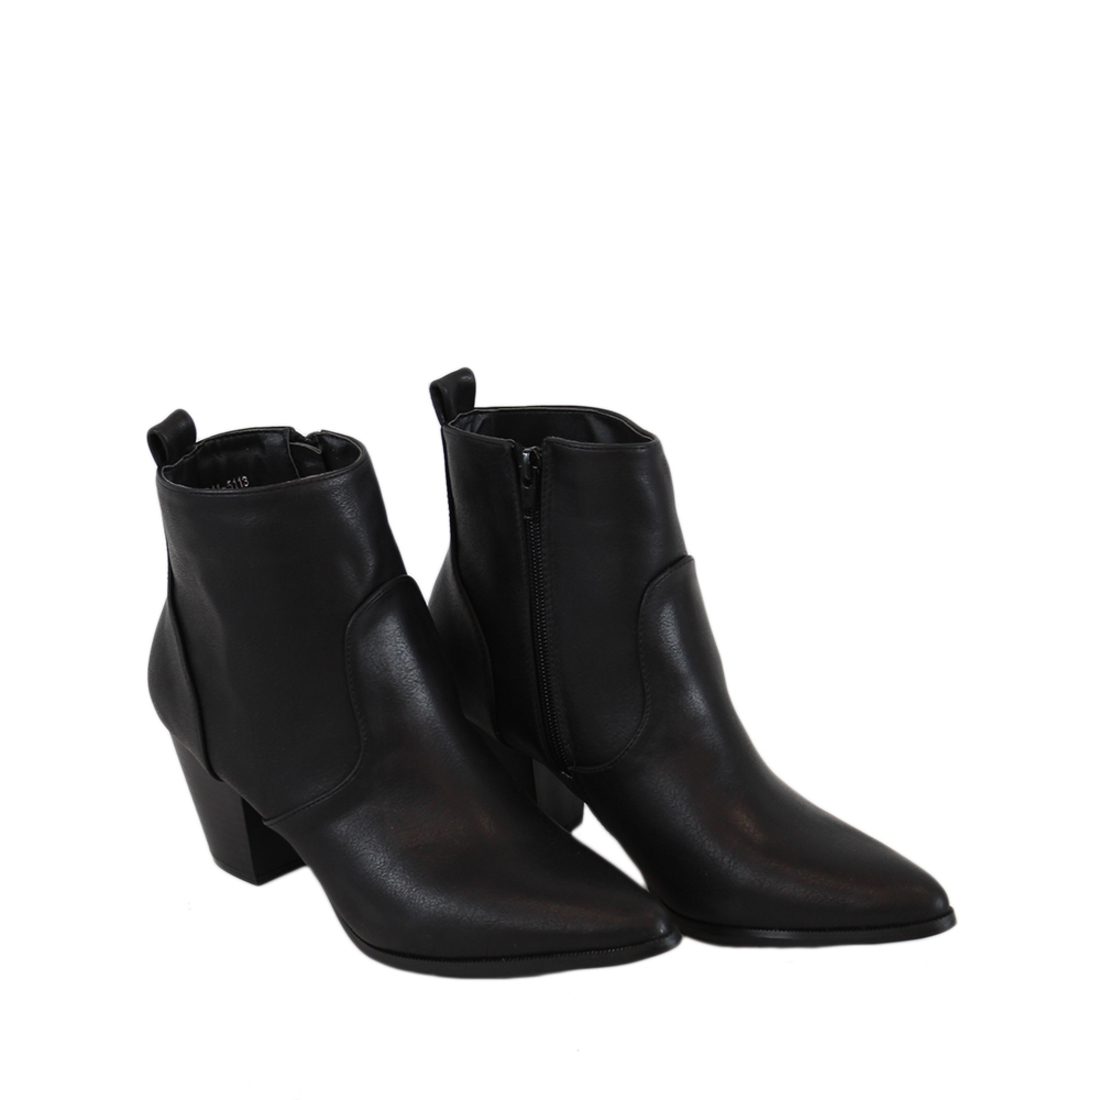 * Pointed leather ankle boots with small heels